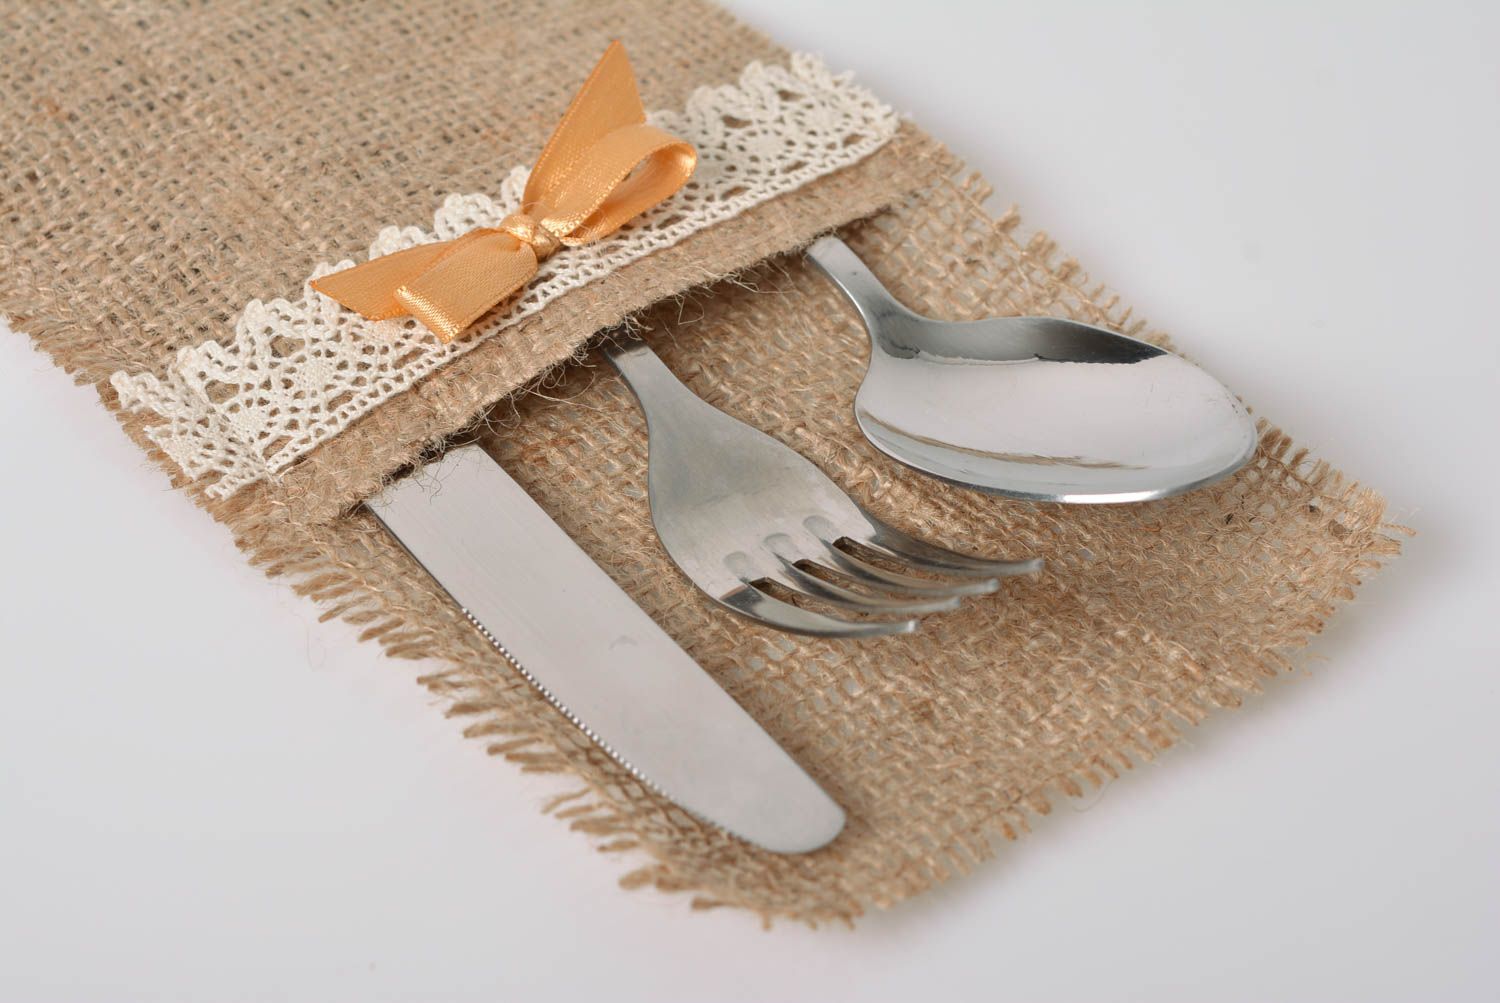 Case for cutlery made of burlap with lace designer accessory for kitchen photo 2